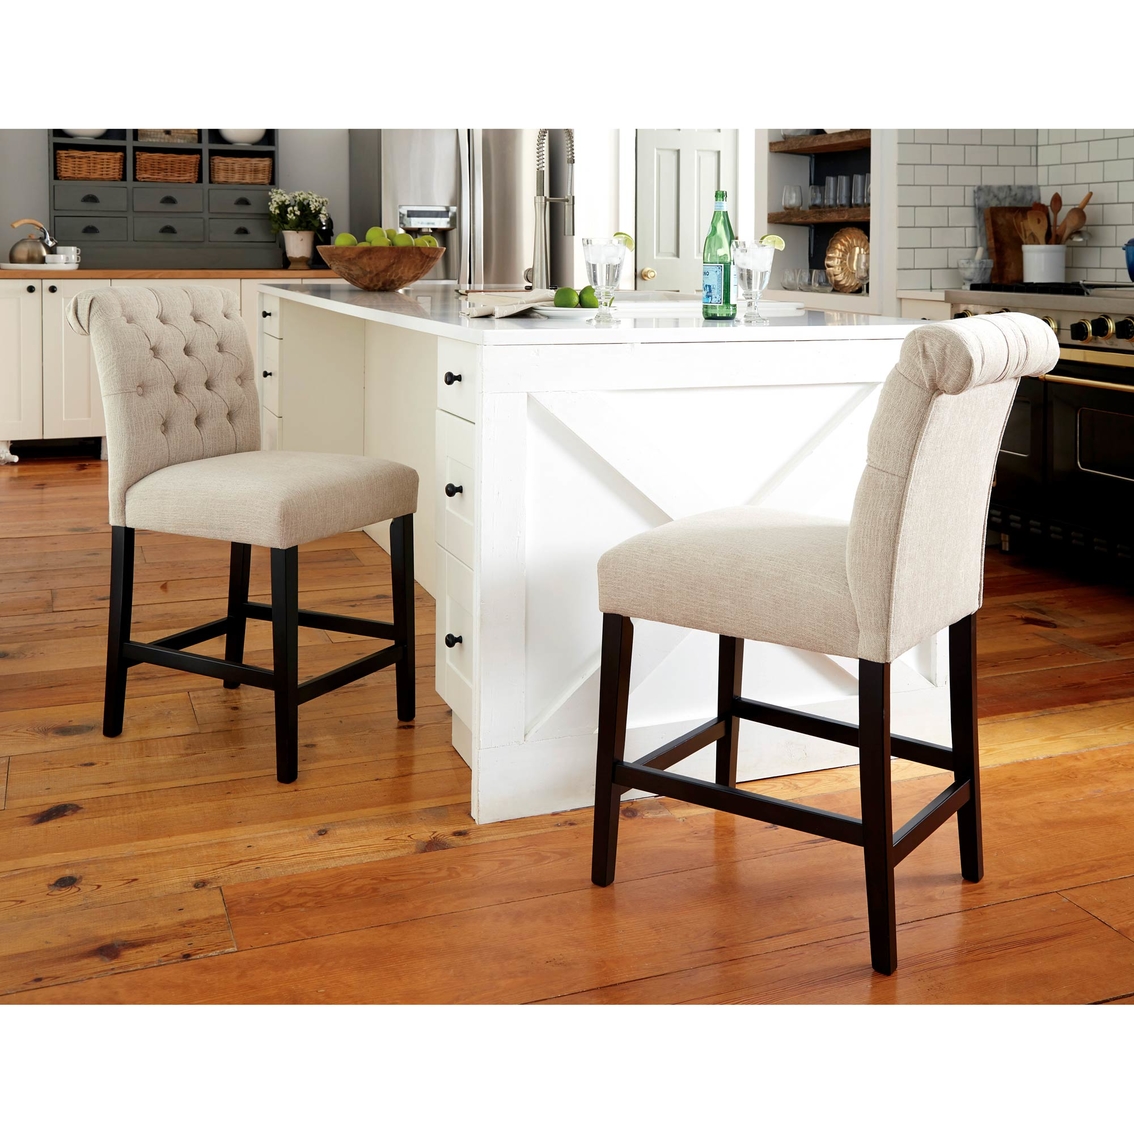 Signature Design by Ashley Tripton Upholstered Counter Stool 2 Pk. - Image 2 of 3